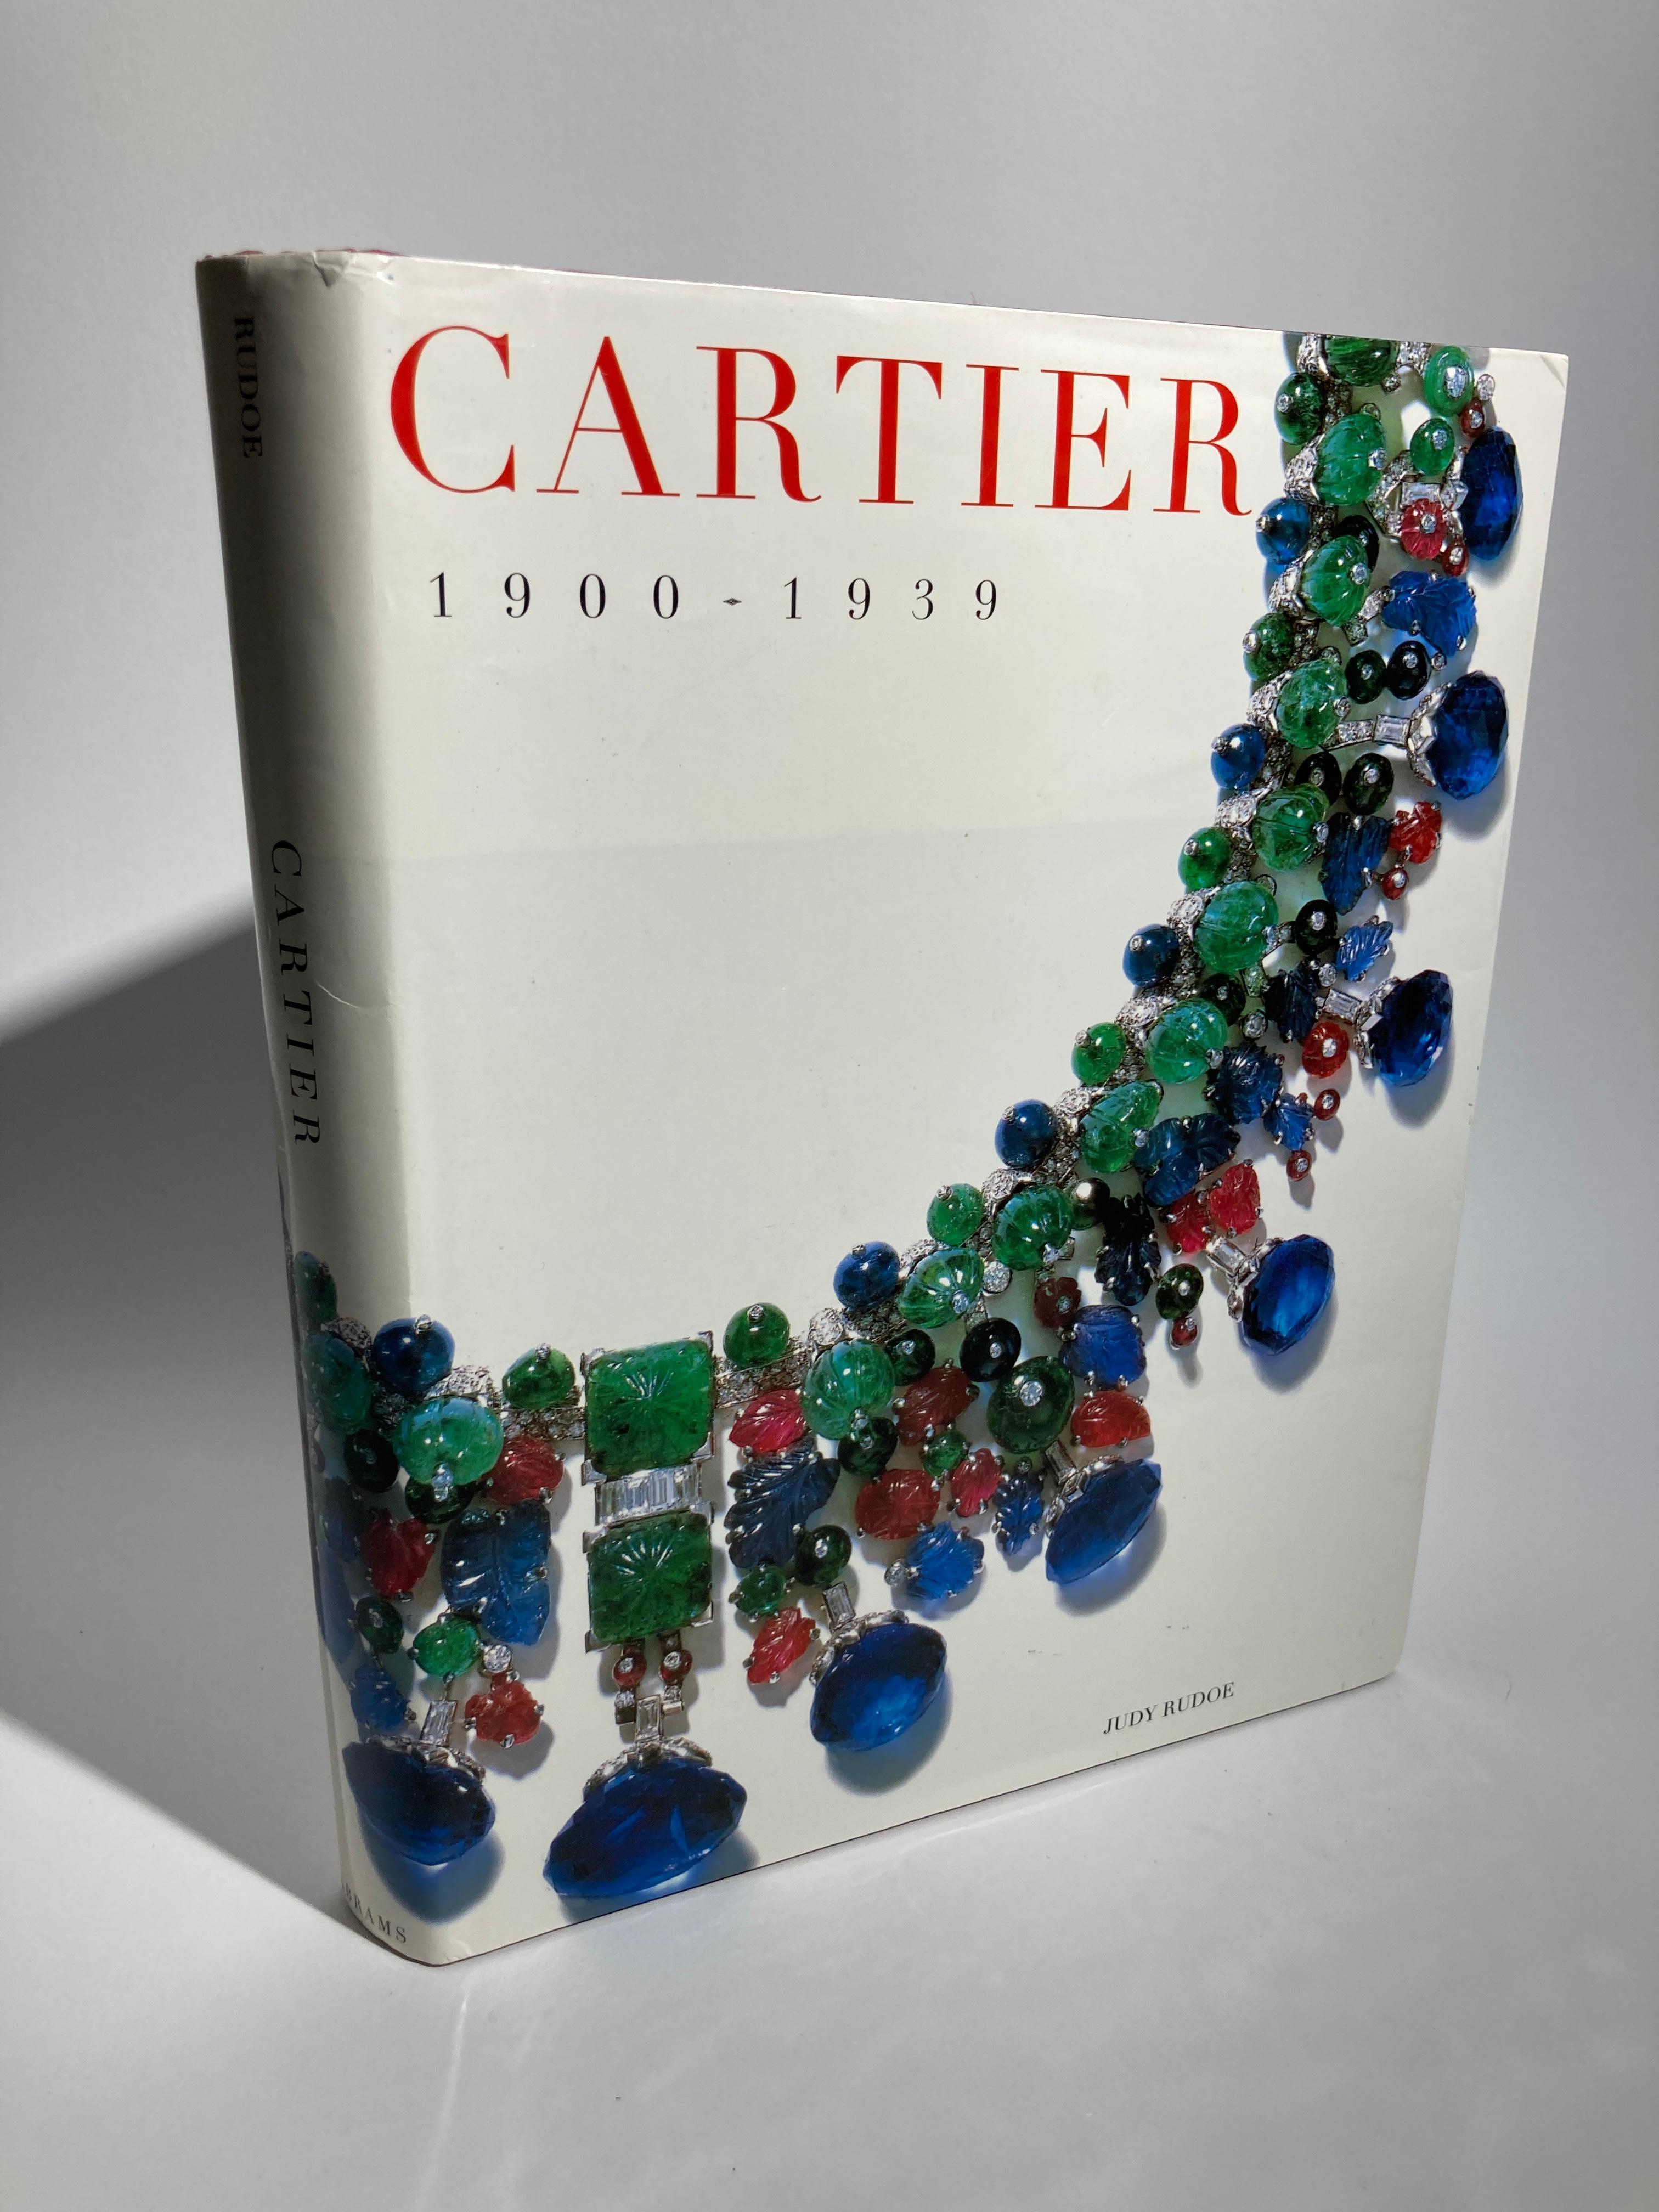 Cartier 1900 to 1939 Hardcover Book
This sumptuous volume surveys spectacular creations from the first four decades of the 20th century, when the renowned Paris-based firm known as Cartier expanded to London and New York. Specially taken photographs